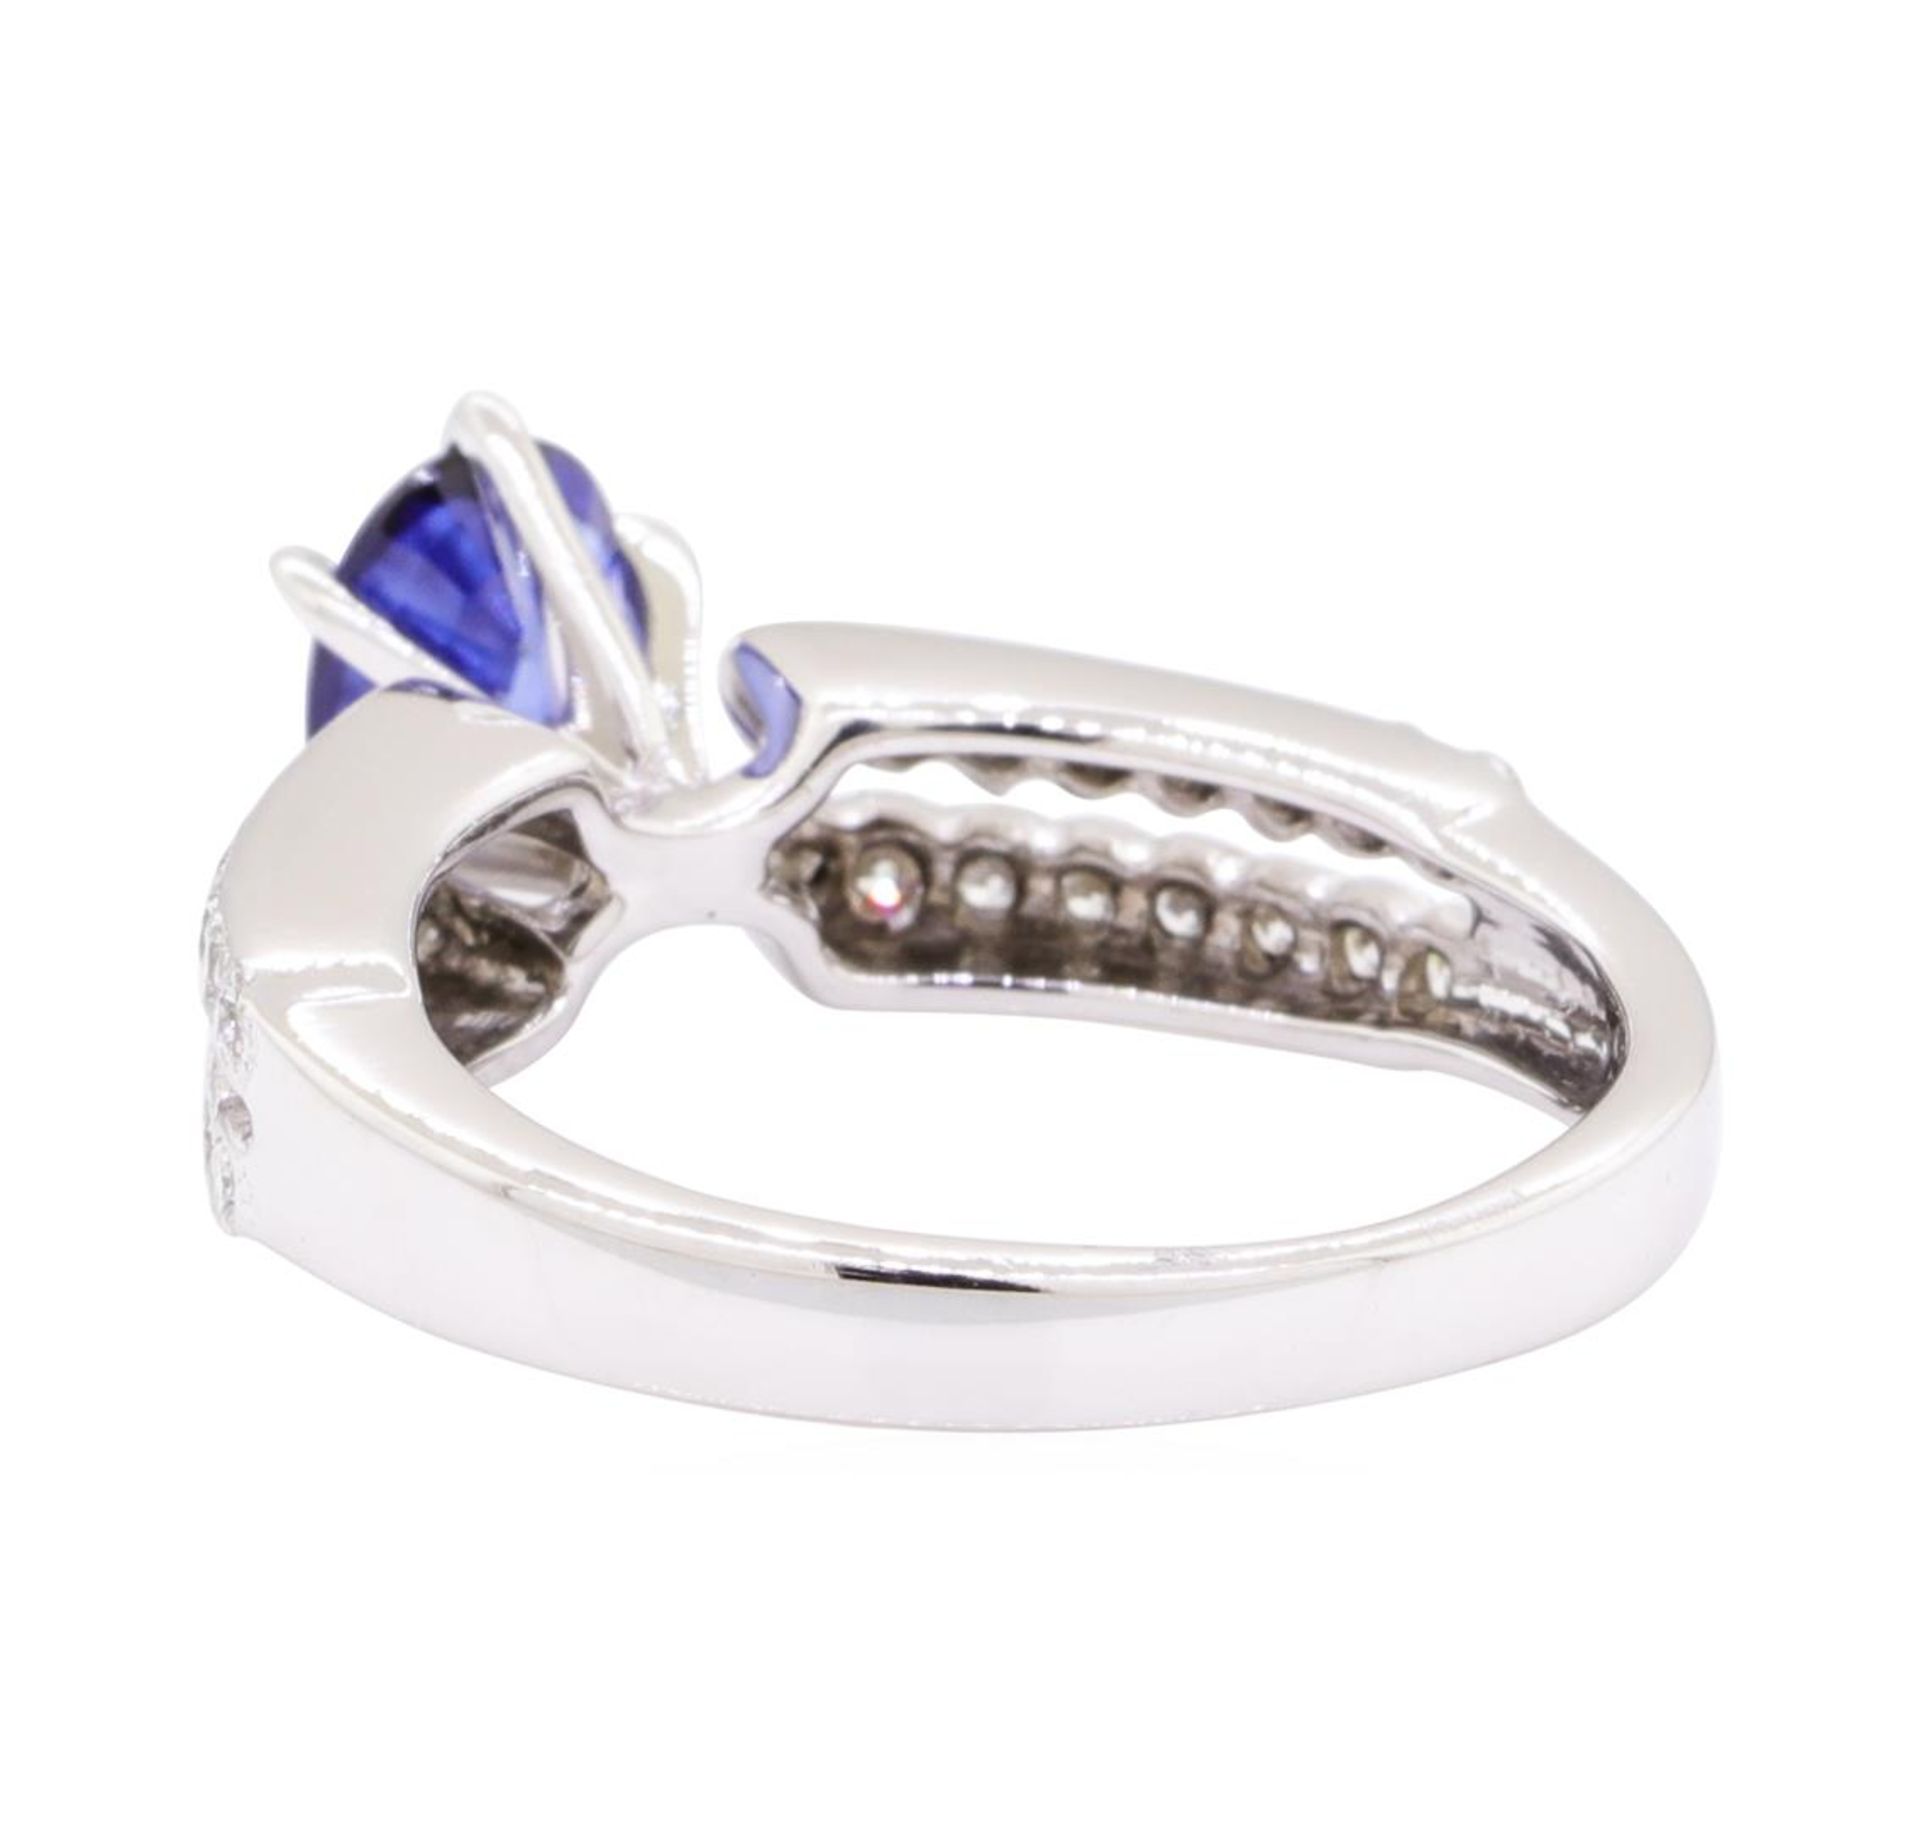 0.88ct Sapphire and Diamond Ring - 18KT White Gold - Image 3 of 4